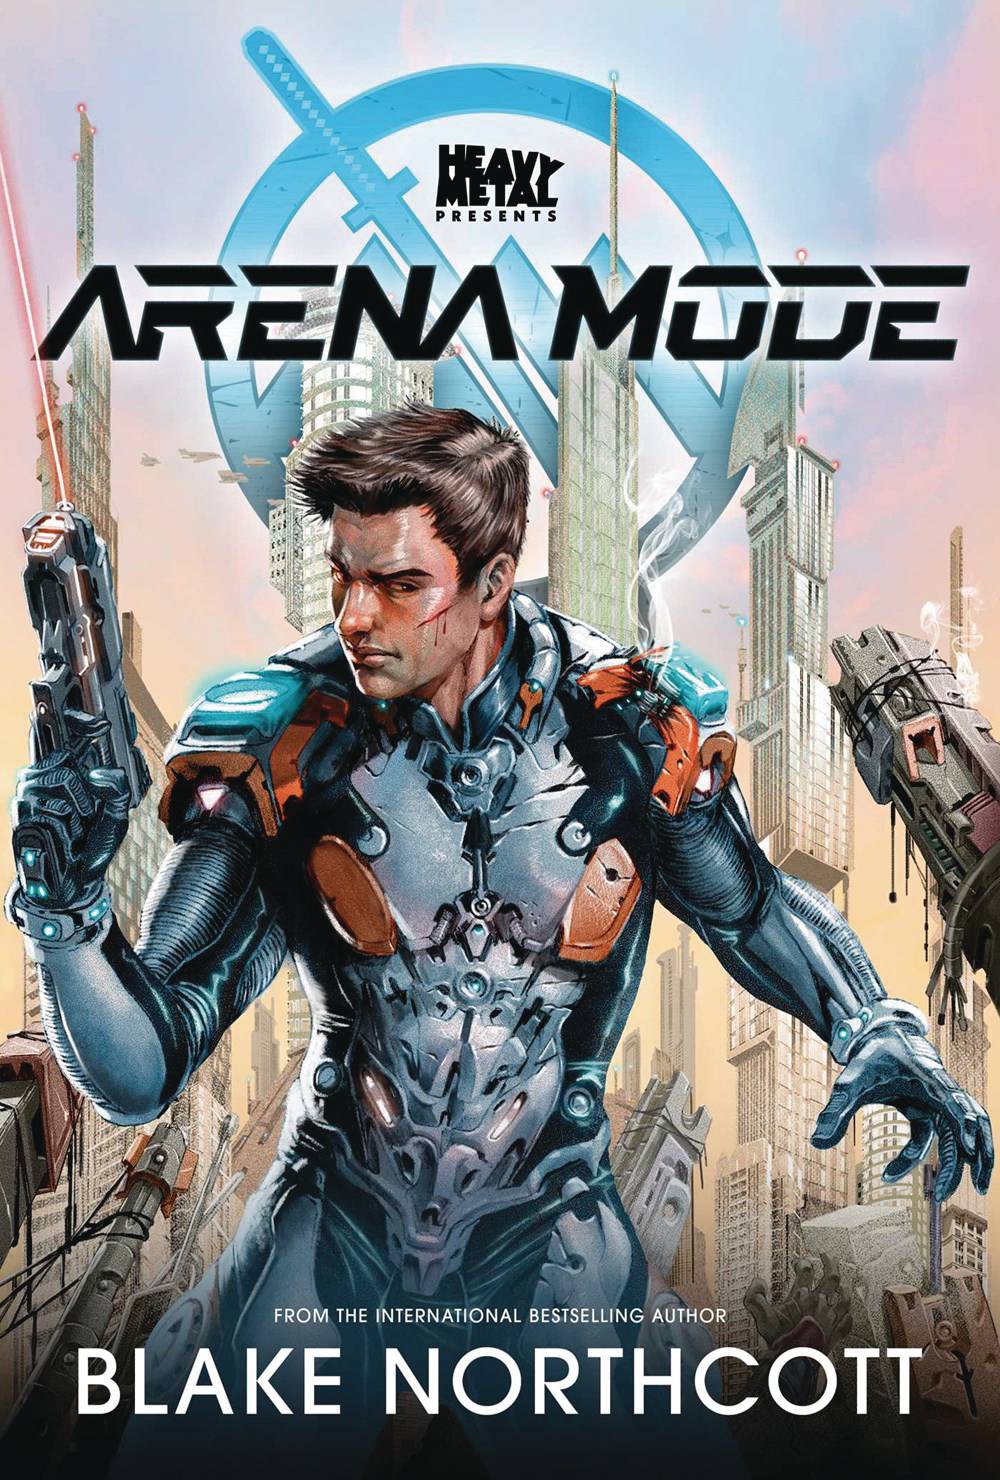 HEAVY METAL PRESENTS ARENA MODE GN (RES)